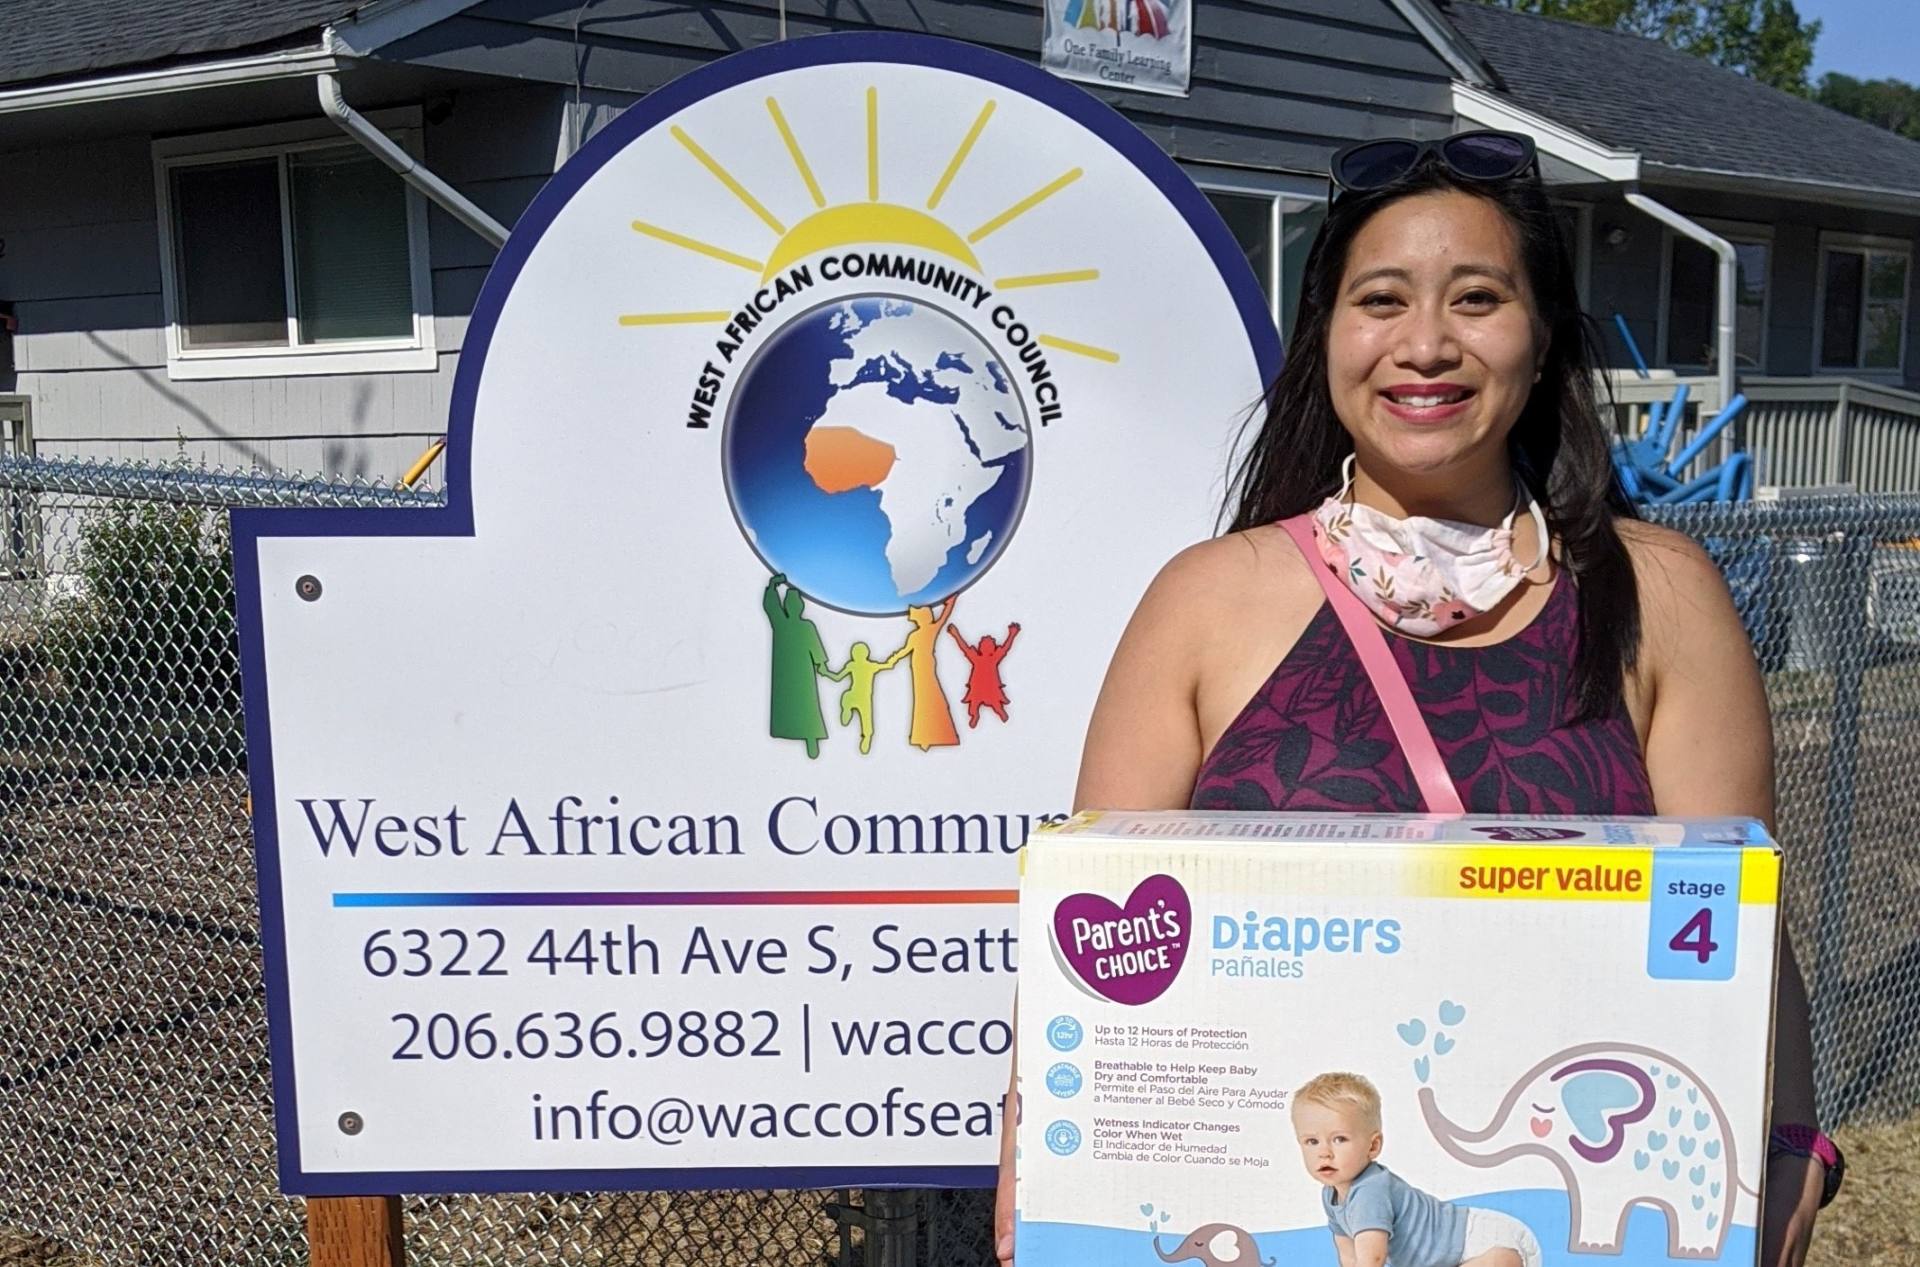 A woman standing outside a building holding a box of diapers.